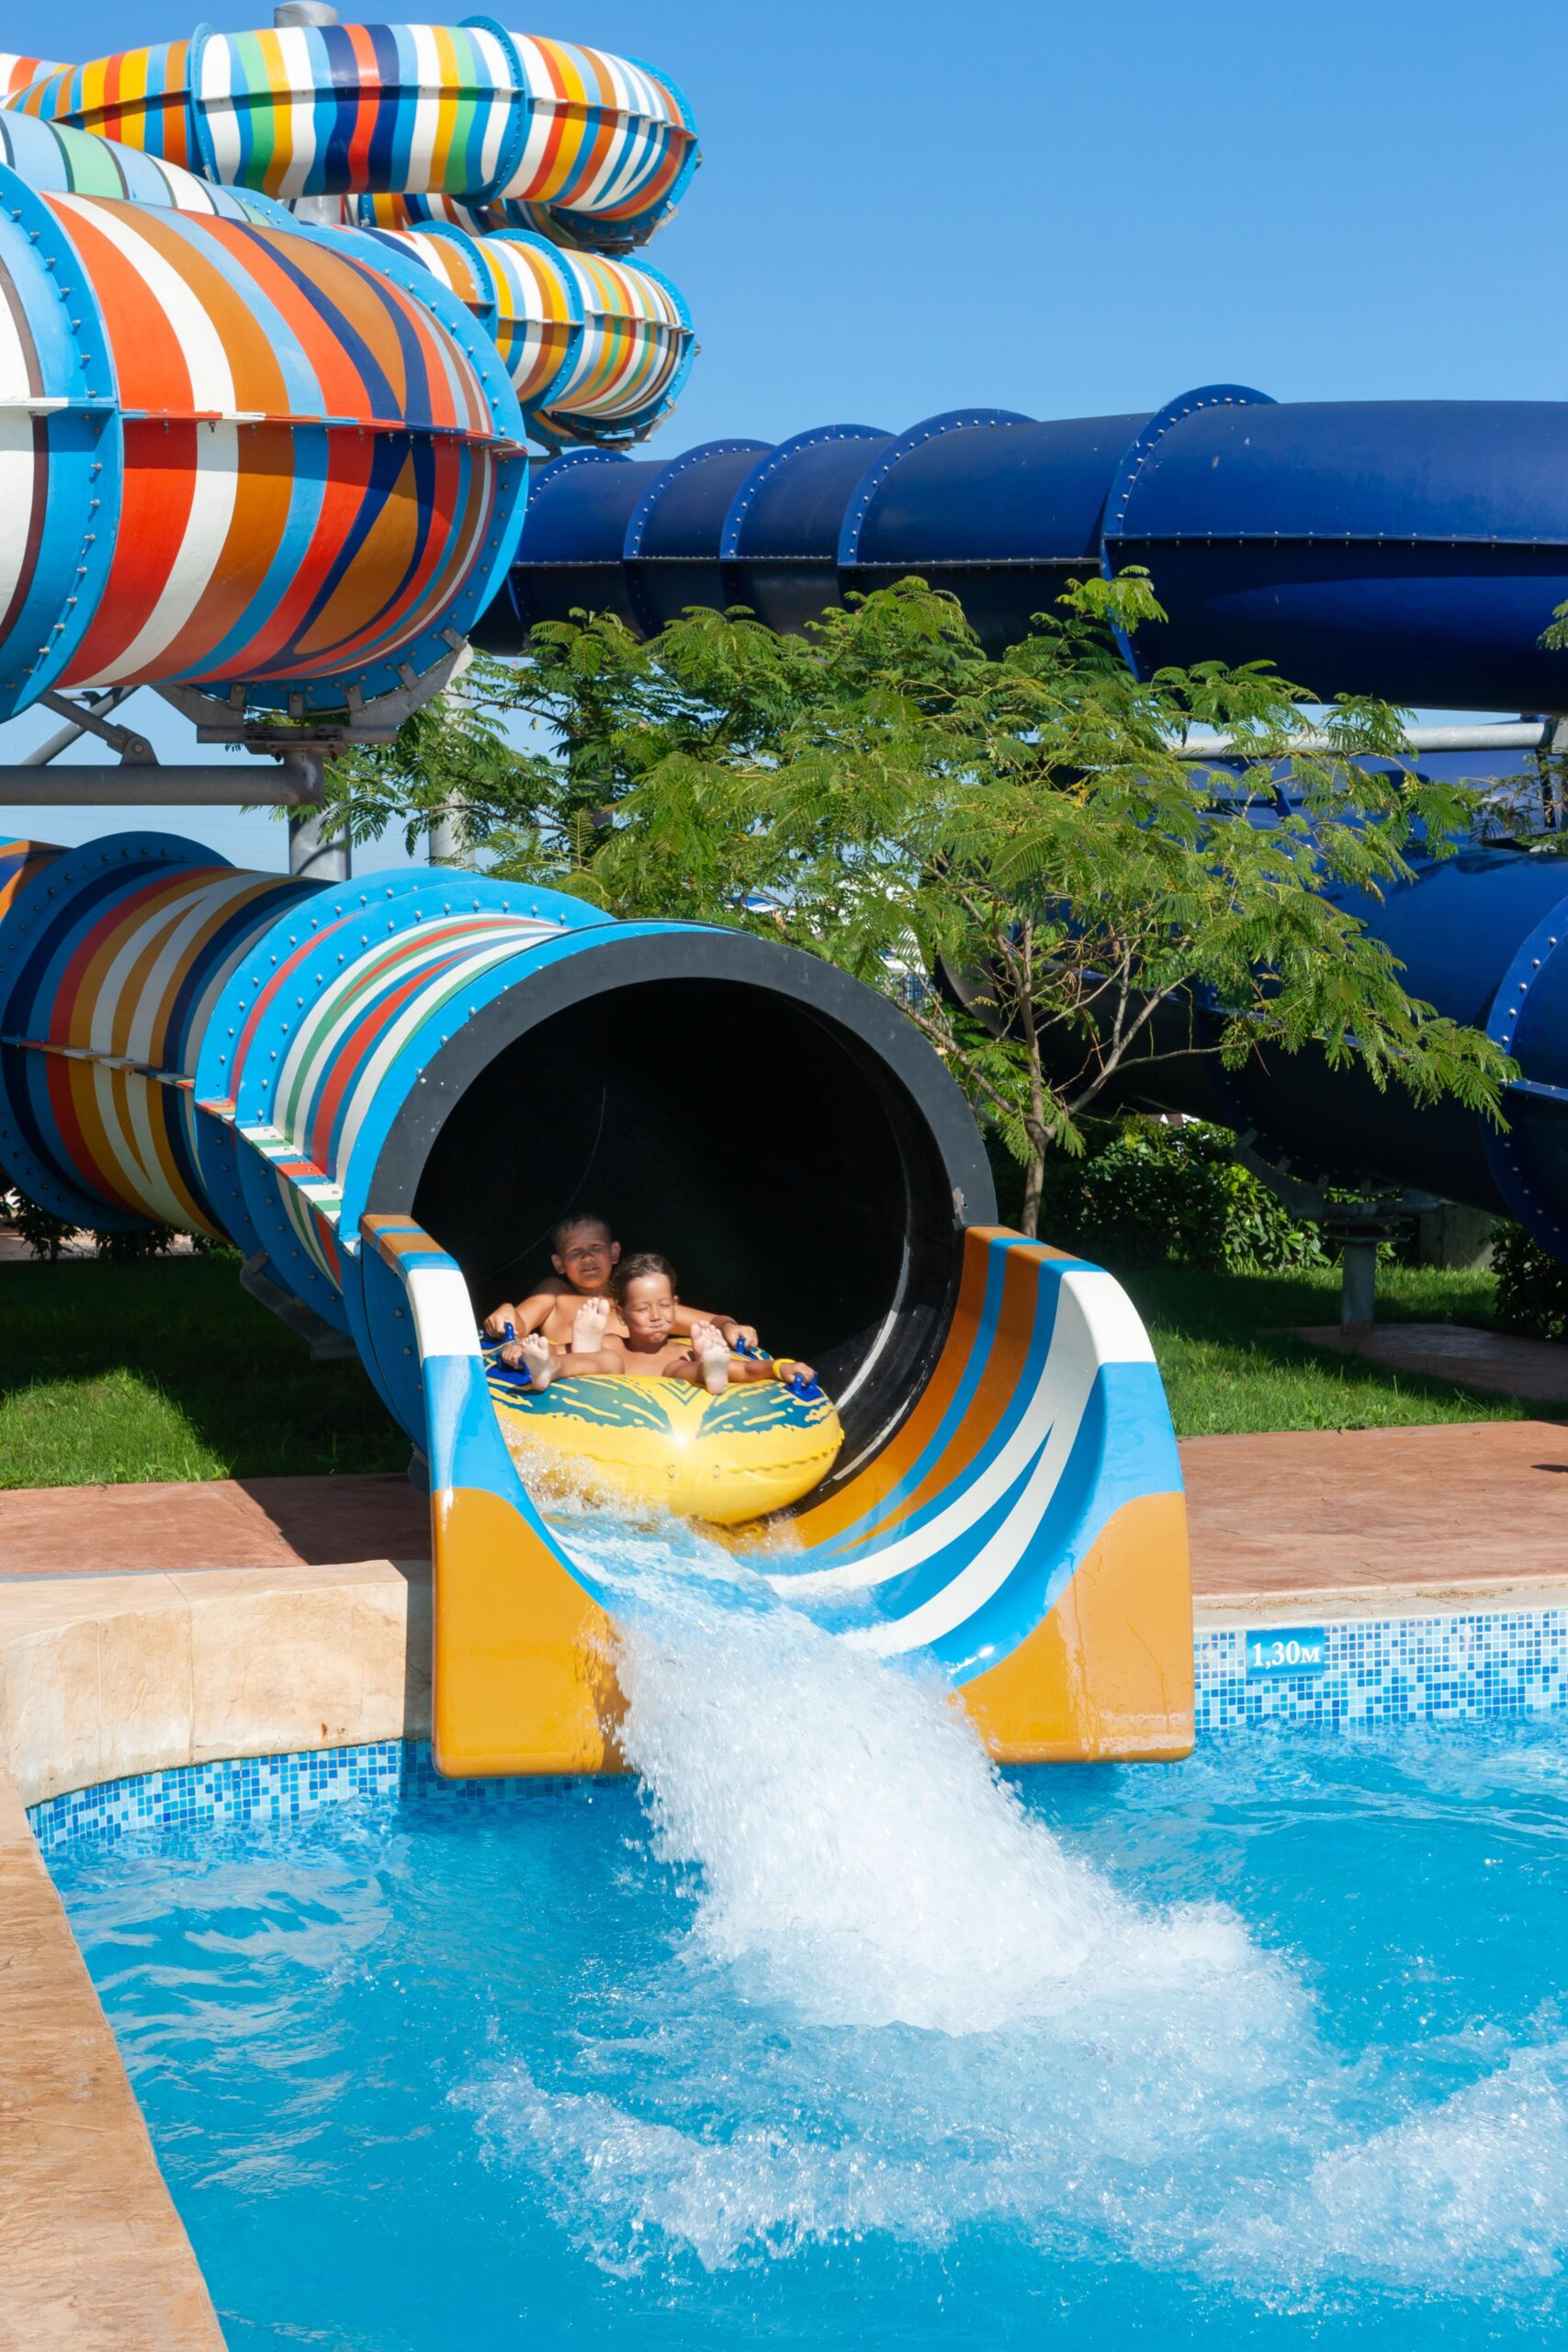 water park safety regulations